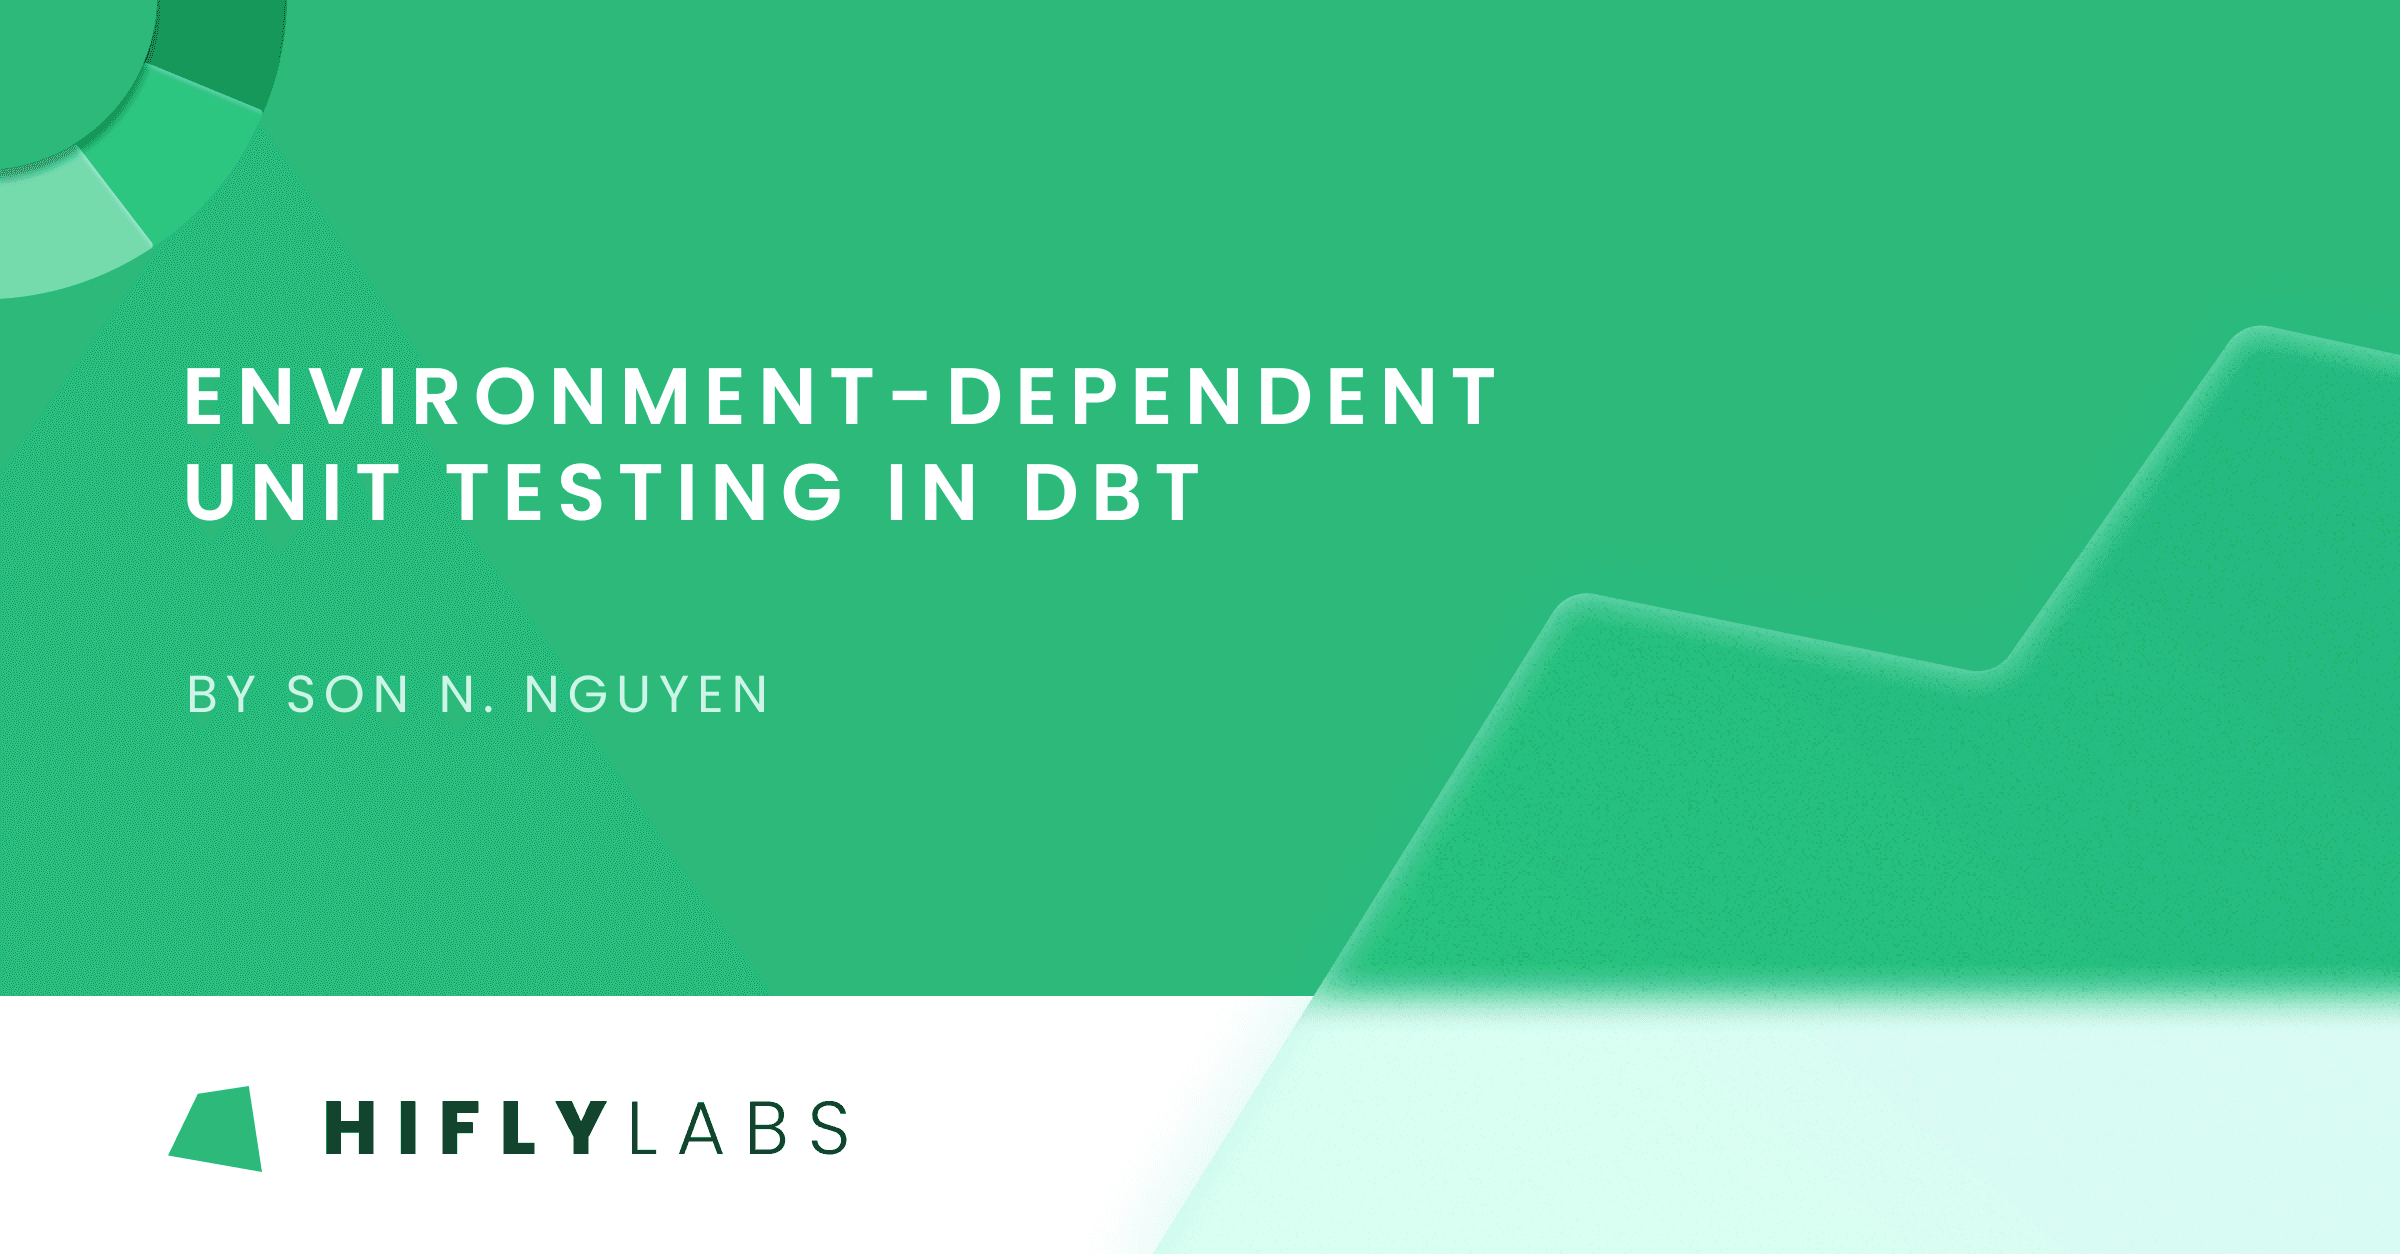 Environment-dependent Unit Testing in dbt